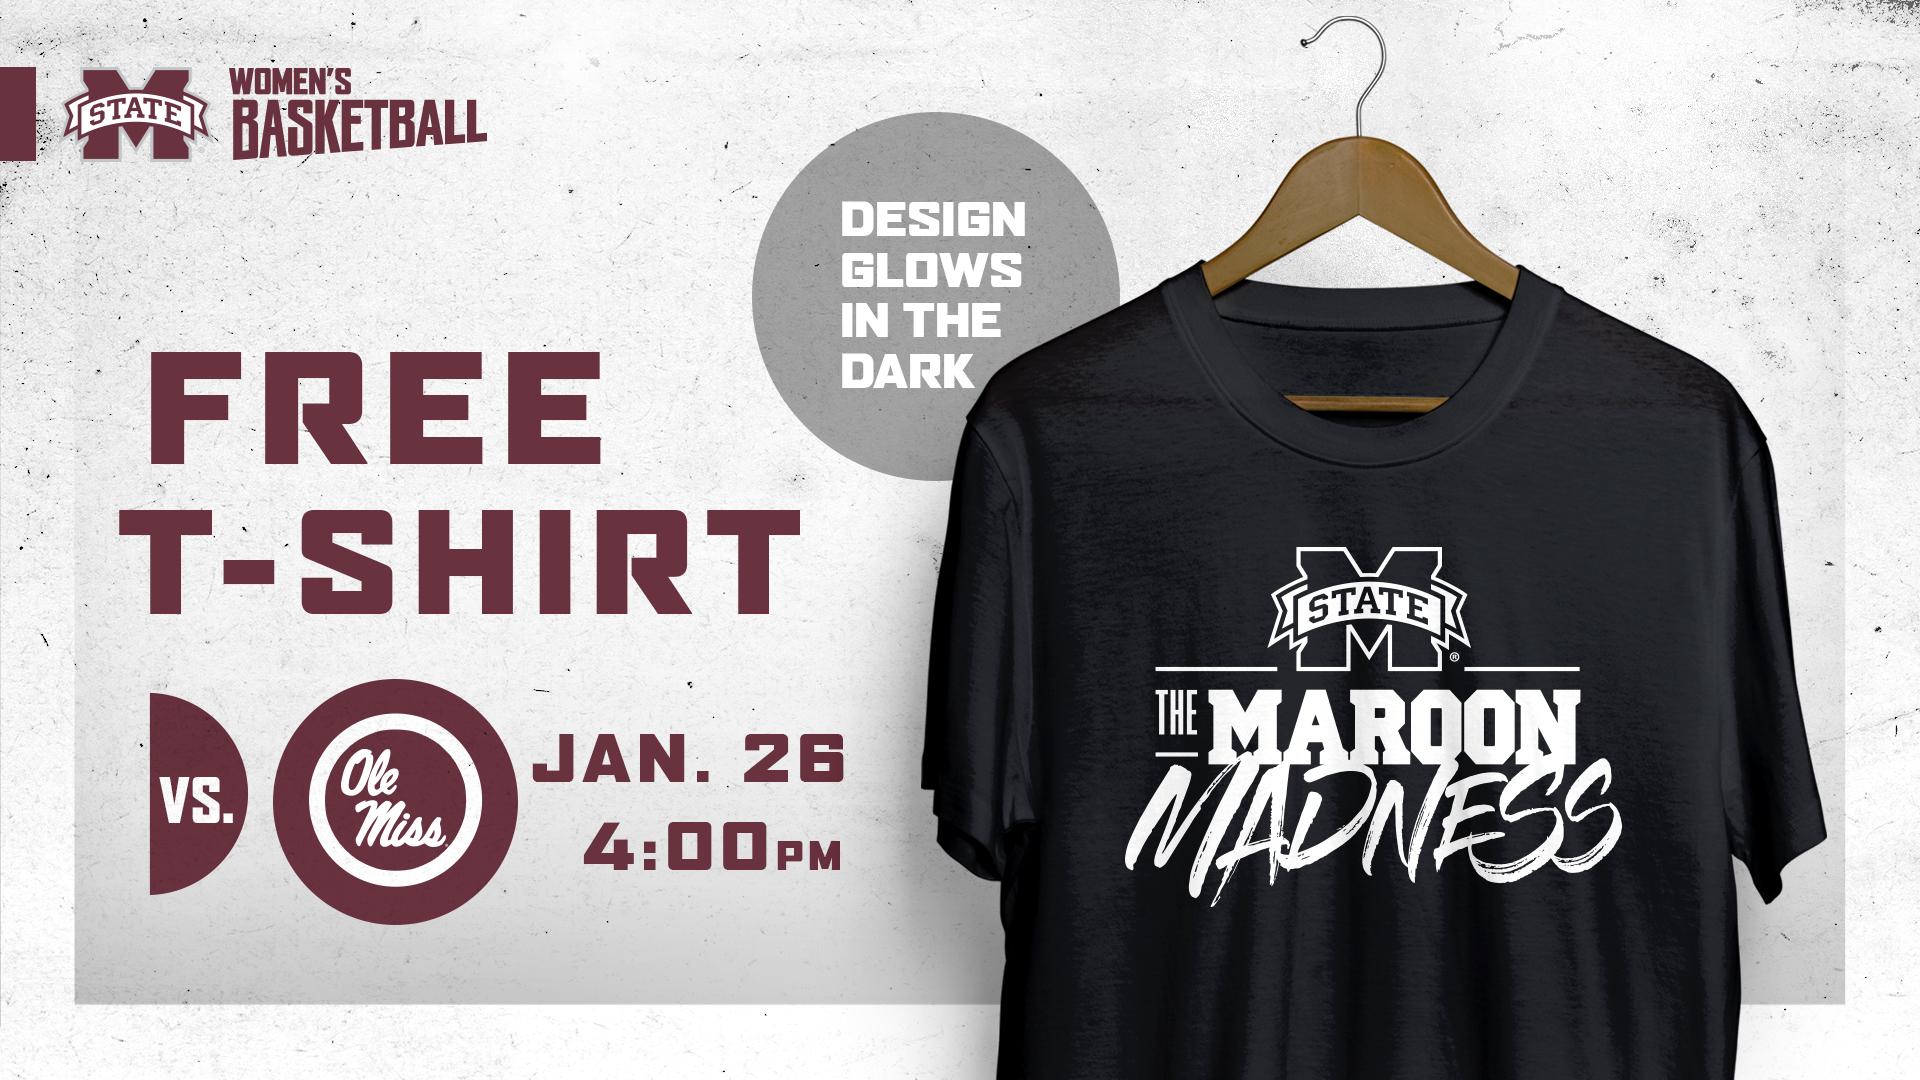 Promotional graphic for MSU women's basketball T-shirt giveaway